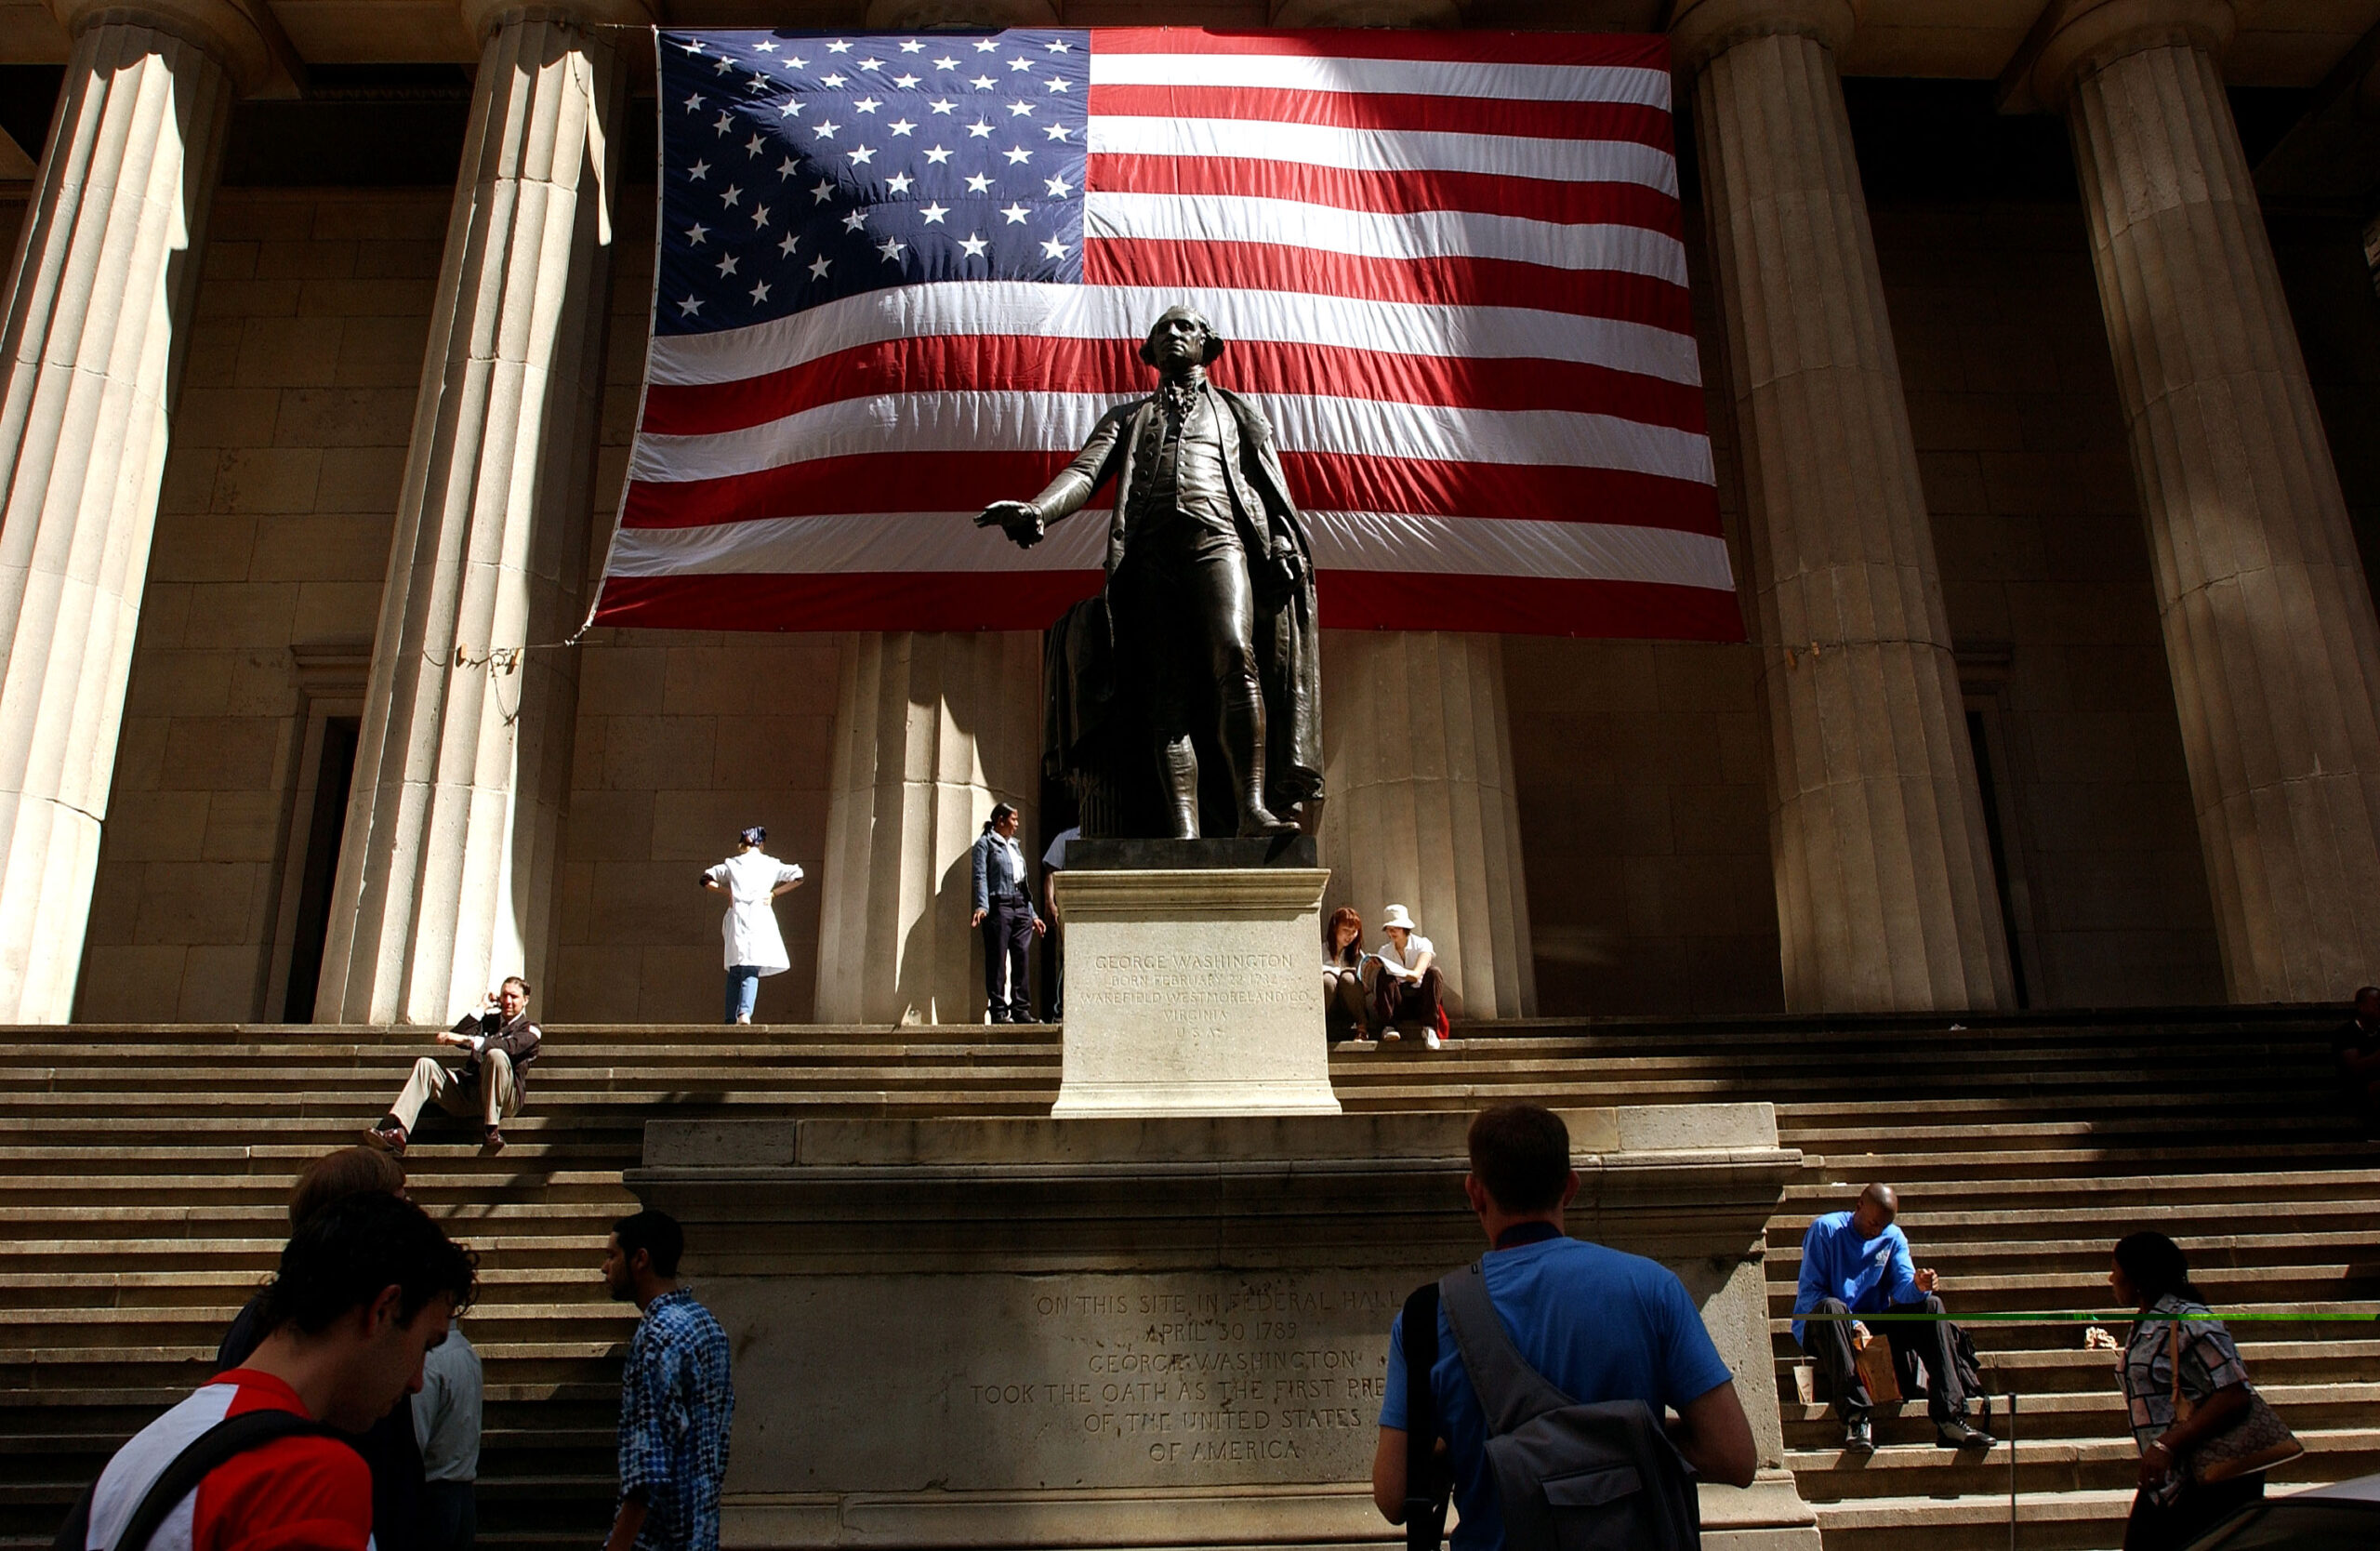 George Washington statue in front of Federal Hall in New York City, September 5, 2002 (Spencer Platt/Getty Images)